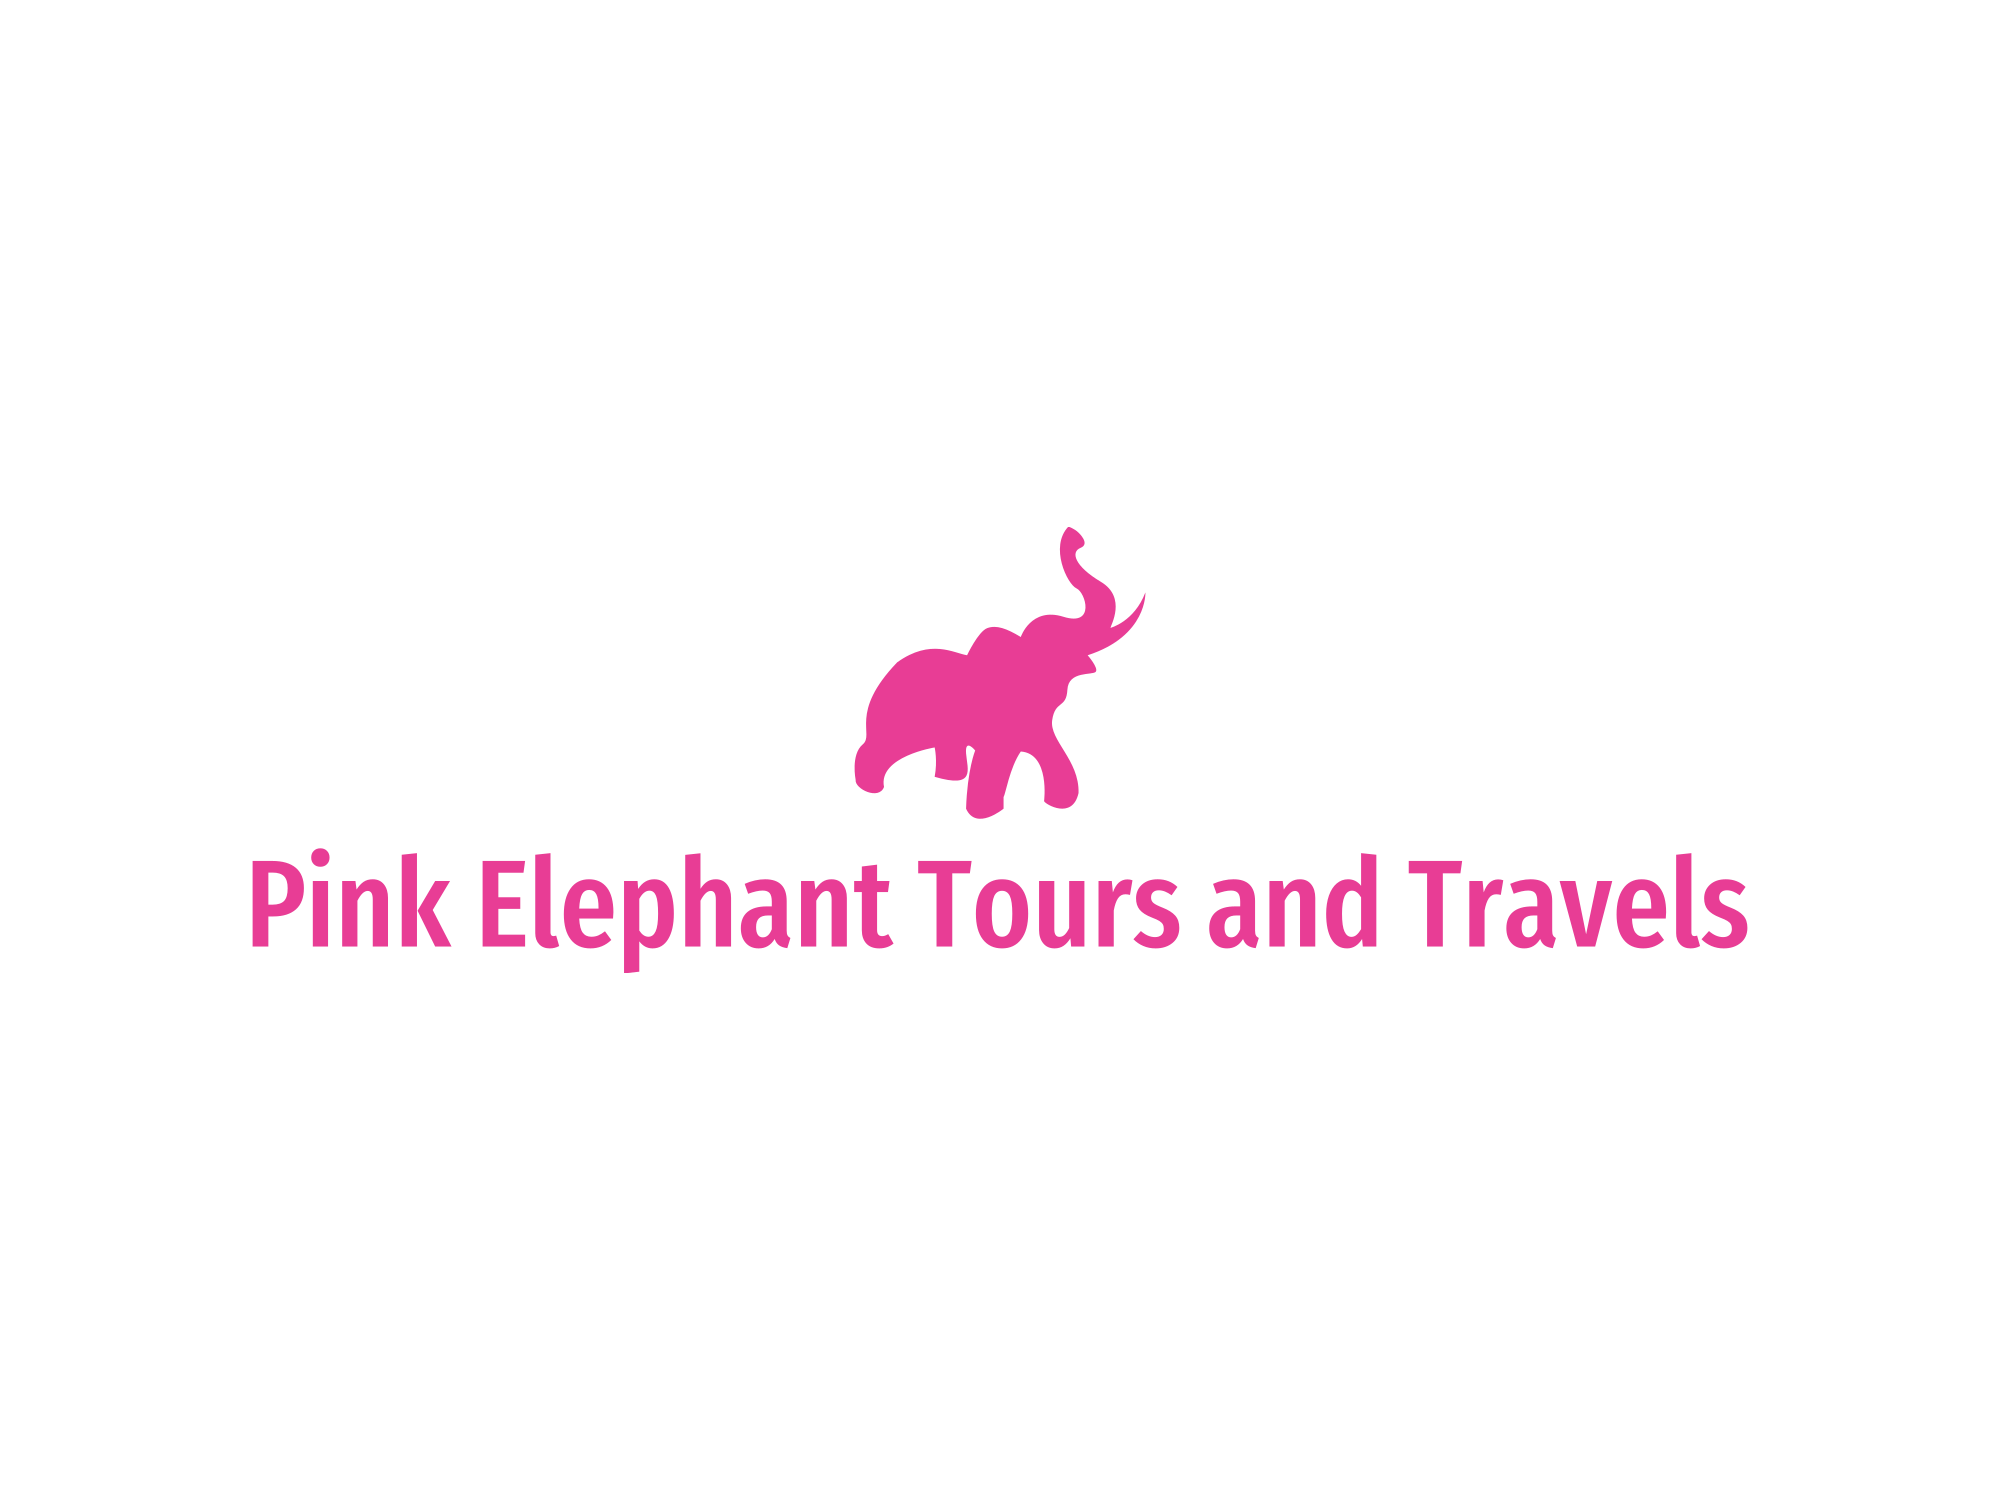 Pink Elephant Tours and Travel